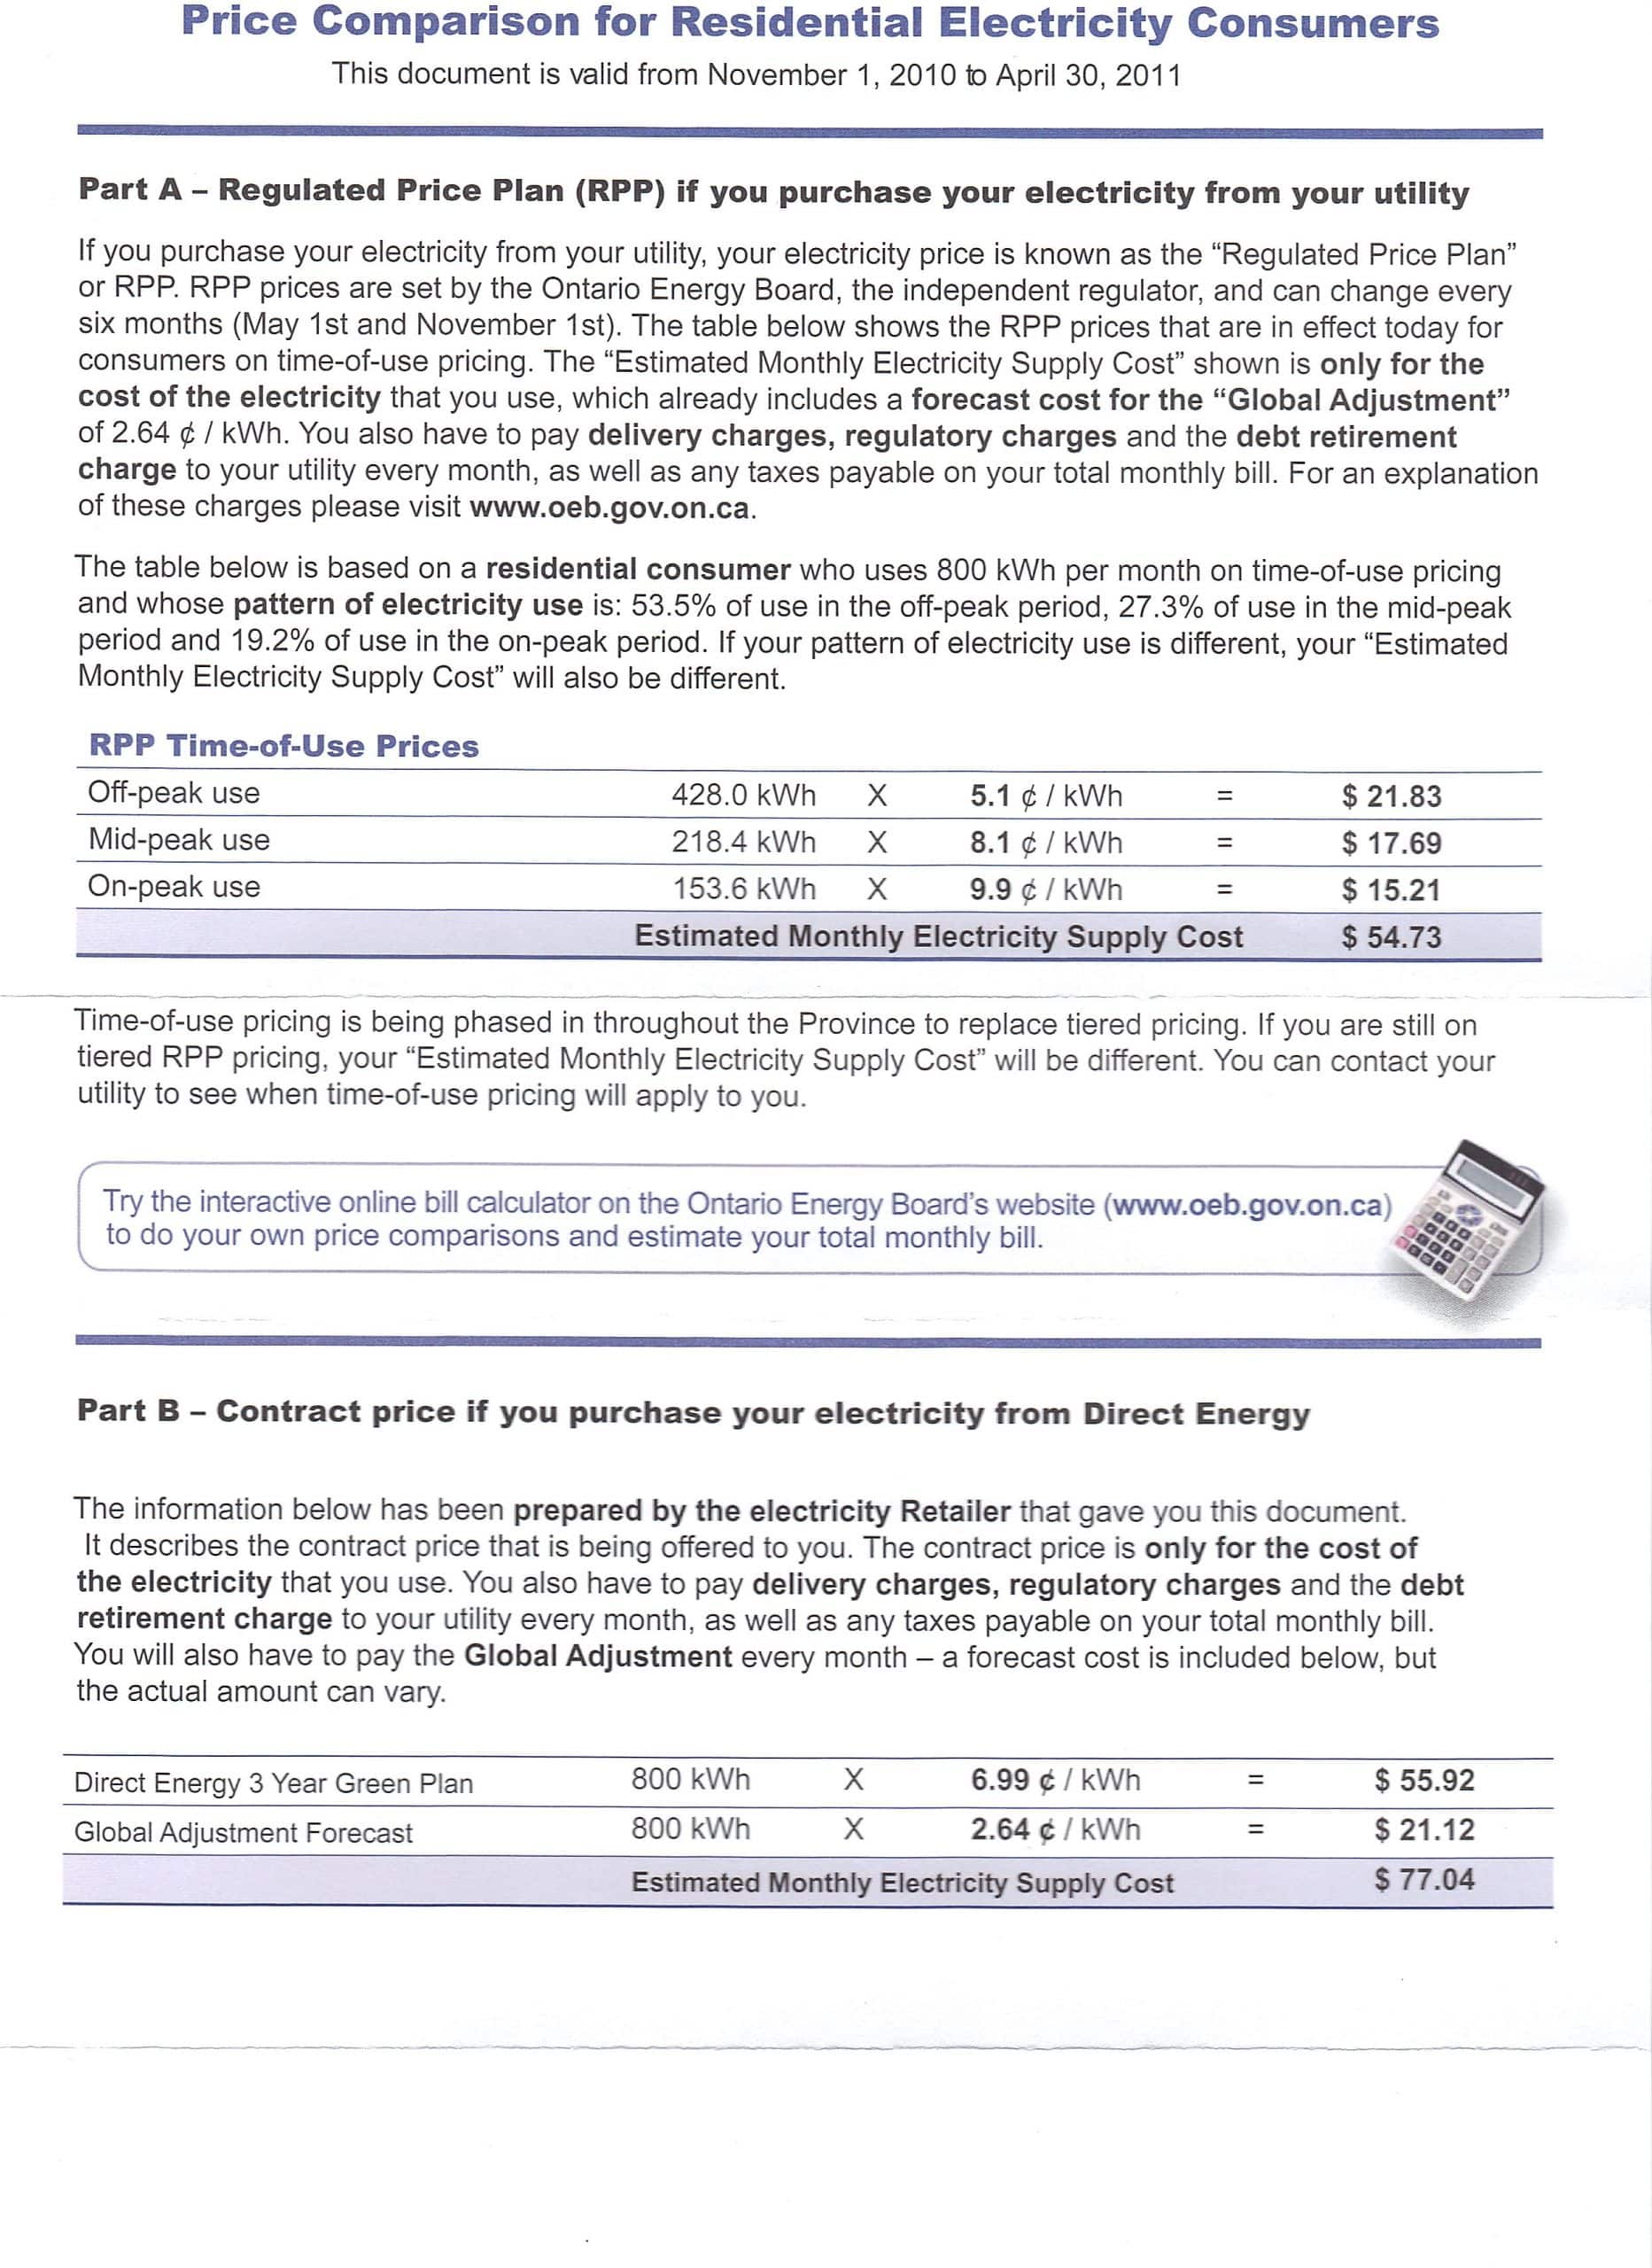 Electricity Prices - Direct Energy